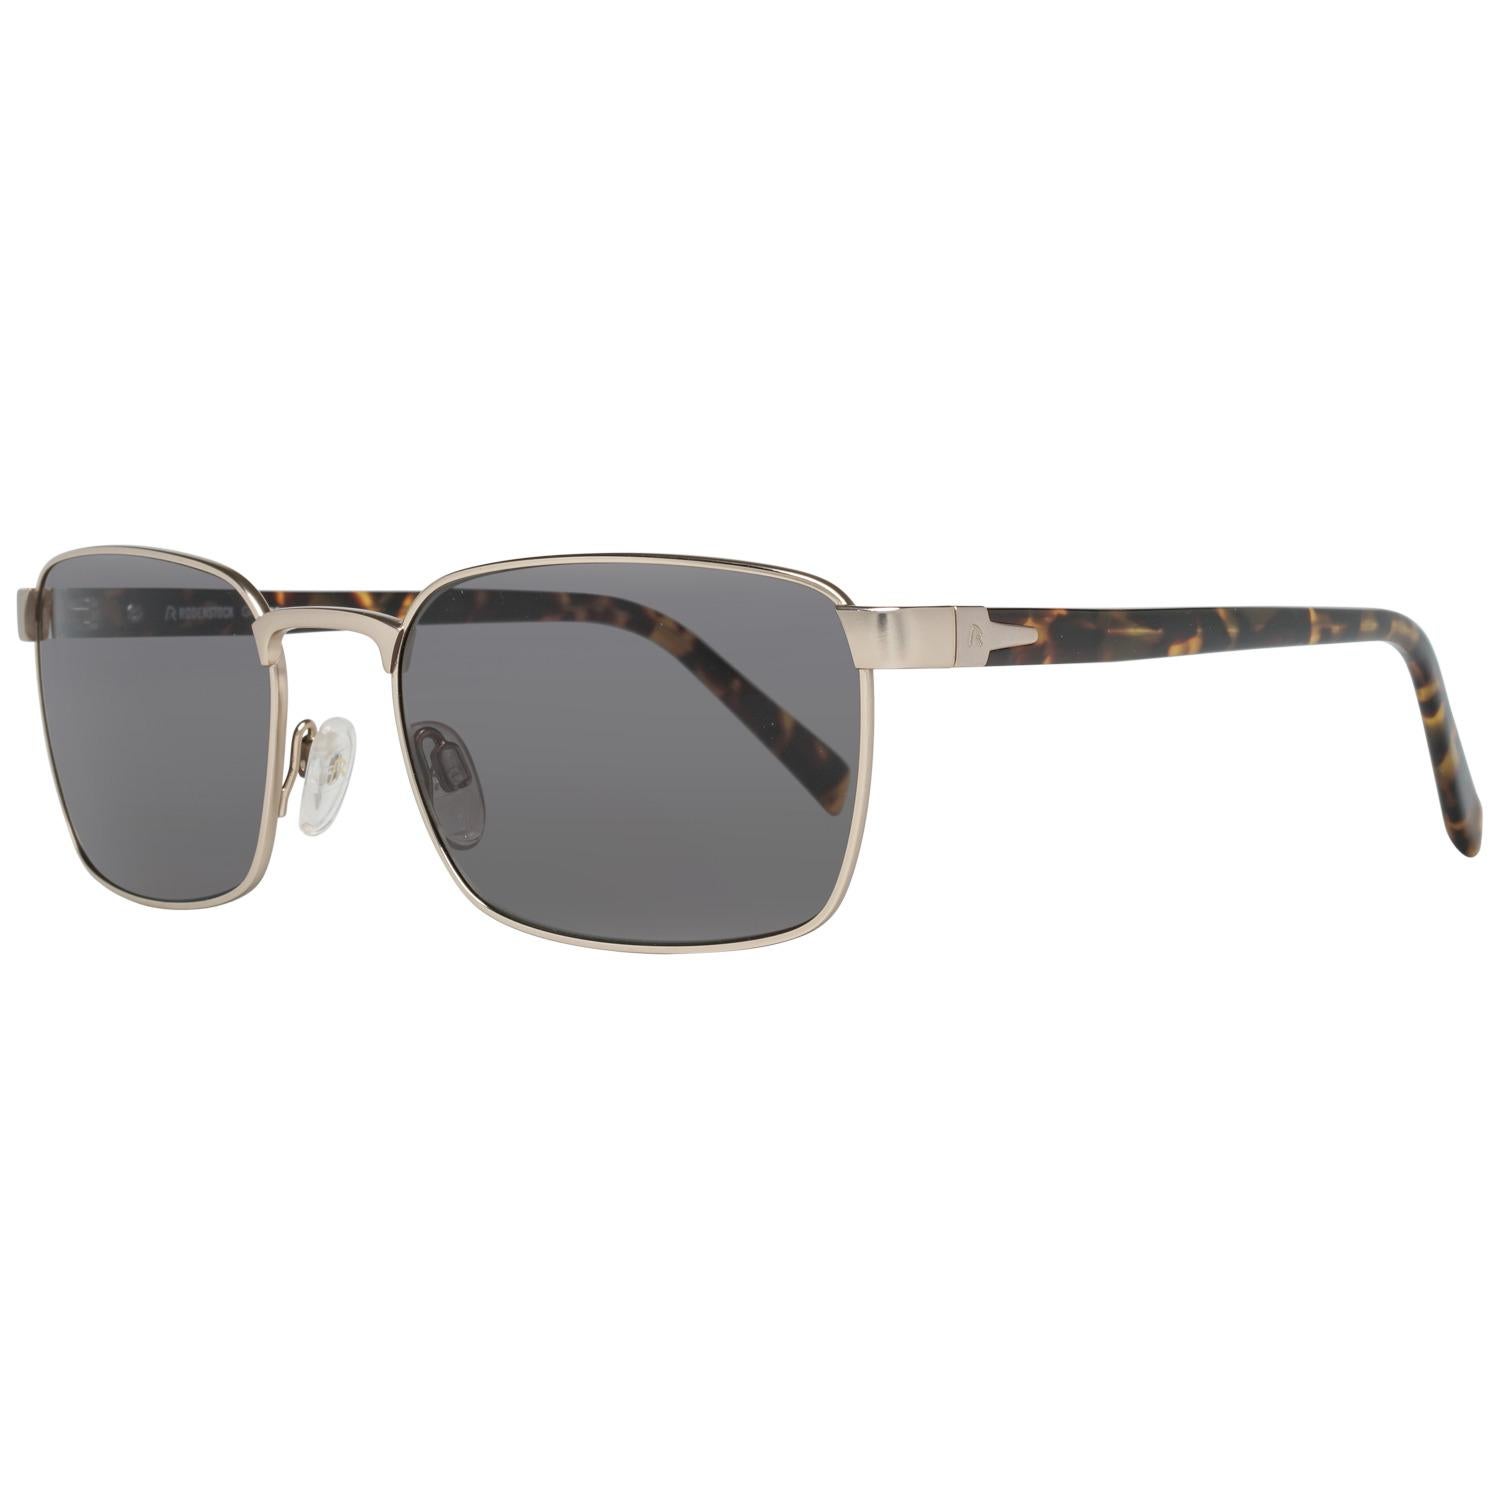 Rodenstock Mint Unisex Silver Sunglasses R1417 C. Silver metal and havana rectangular frame 56-19 140 mm.


Details

MATERIAL: Metal

COLOR:

MODEL: R1417 C

GENDER: Unisex Adults

COUNTRY OF MANUFACTURE: China

ORIGINAL CASE?: Yes

STYLE: